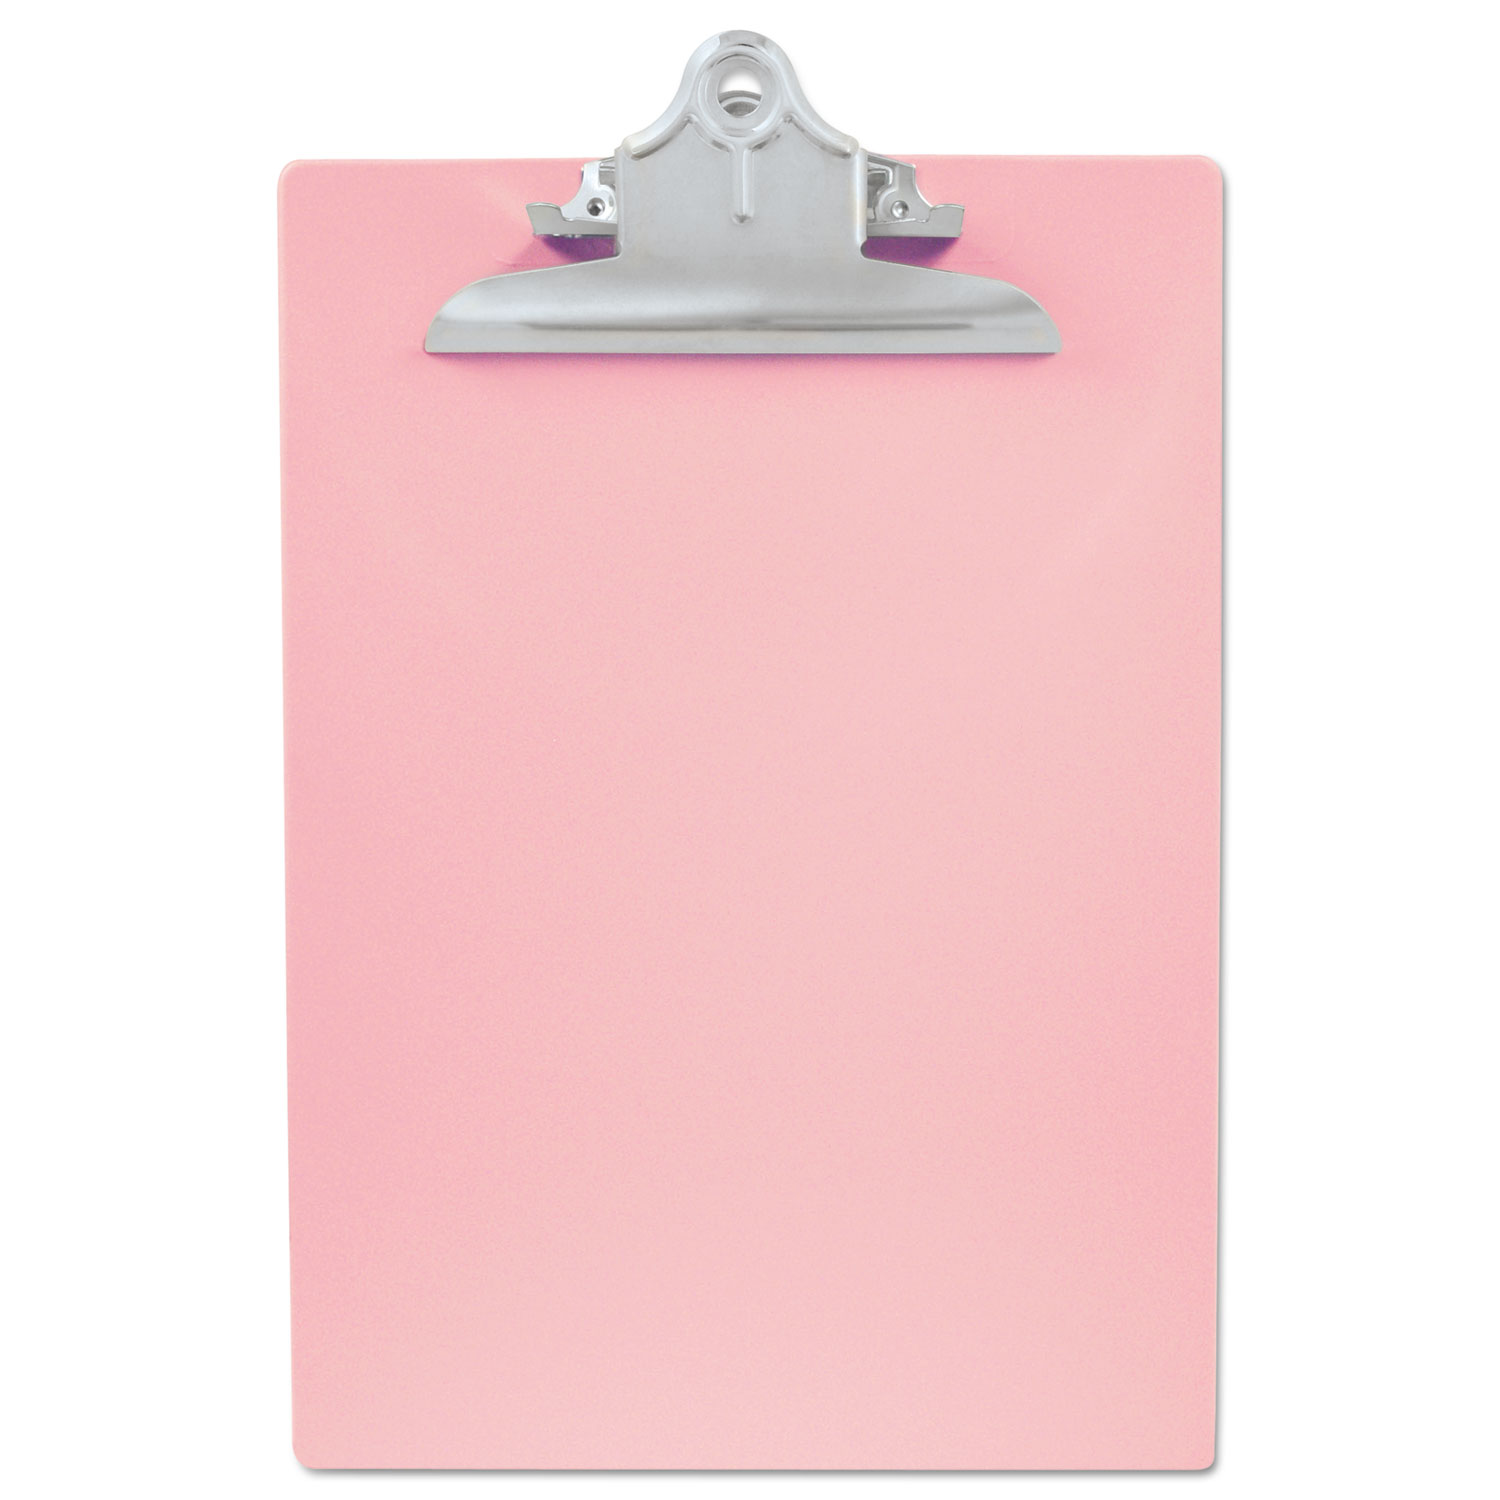  Saunders 21800 Recycled Plastic Clipboard with Ruler Edge, 1 Clip Cap, 8 1/2 x 12 Sheets, Pink (SAU21800) 